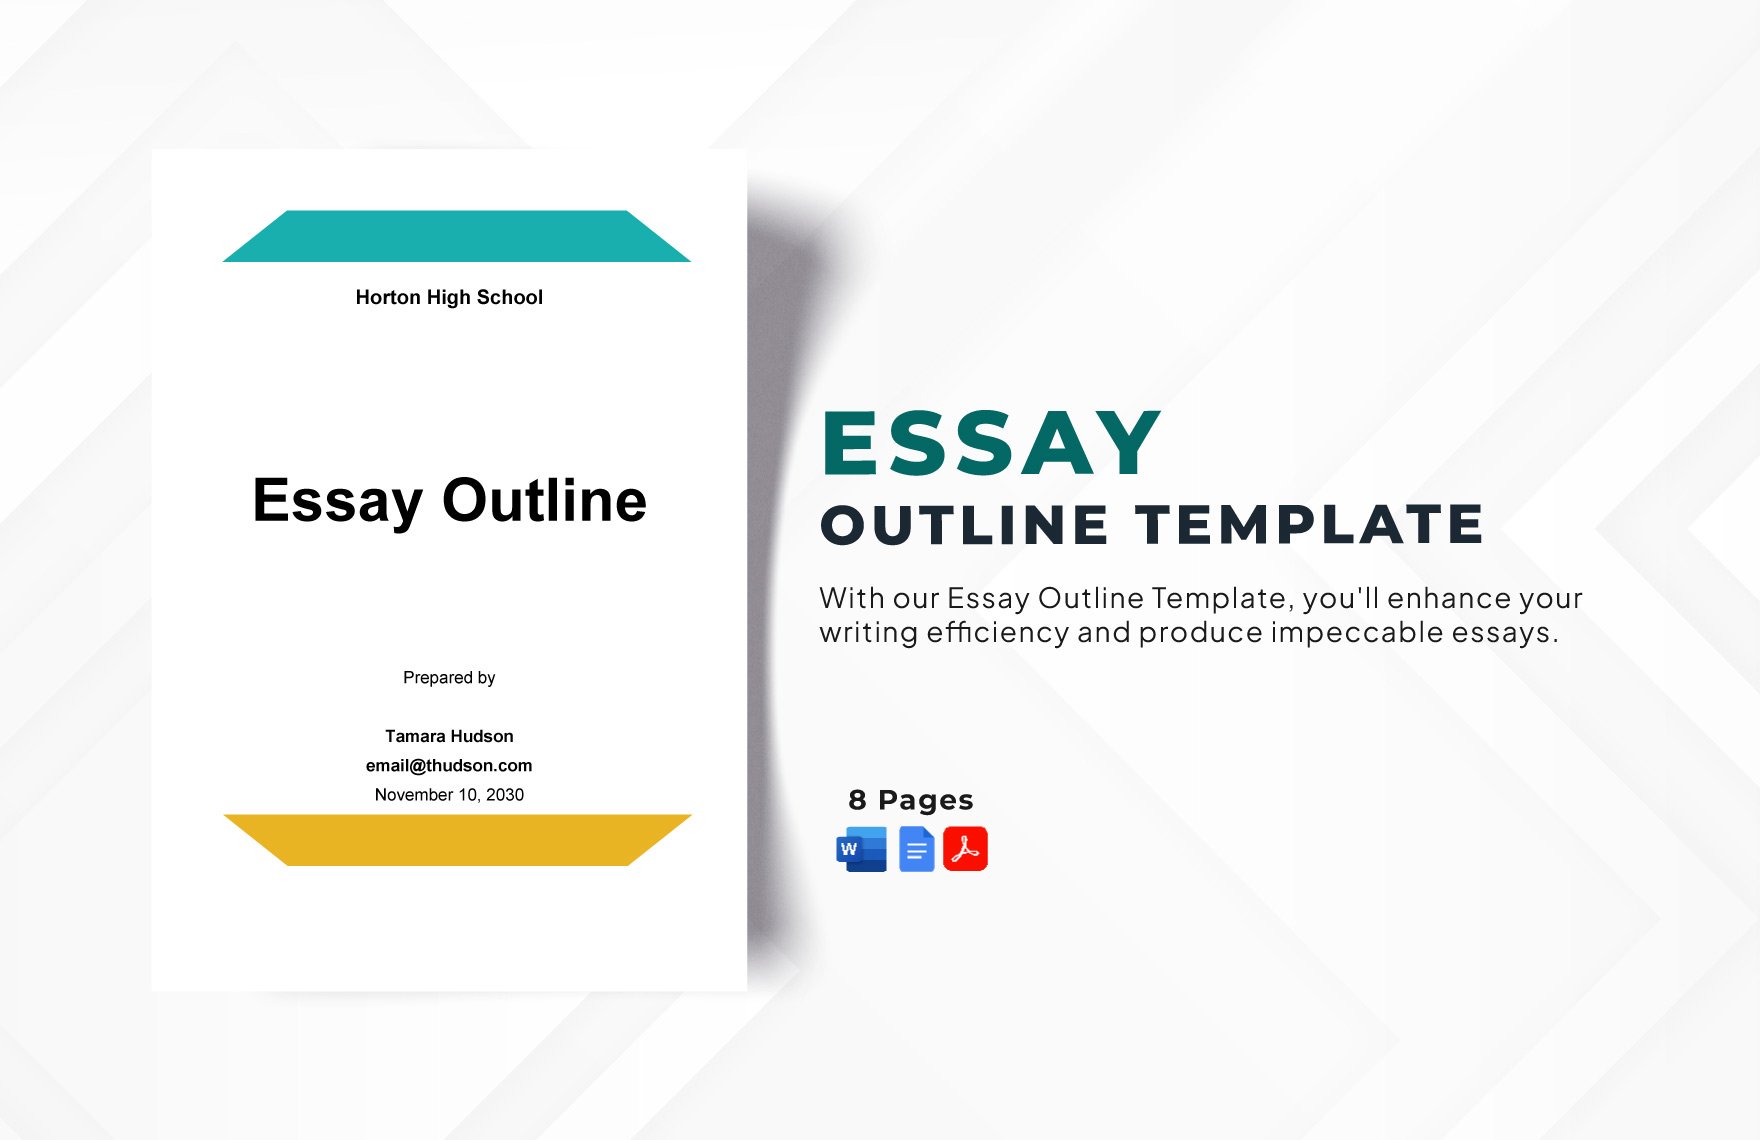 Free Essay Outline Template in Word, Google Docs, PDF